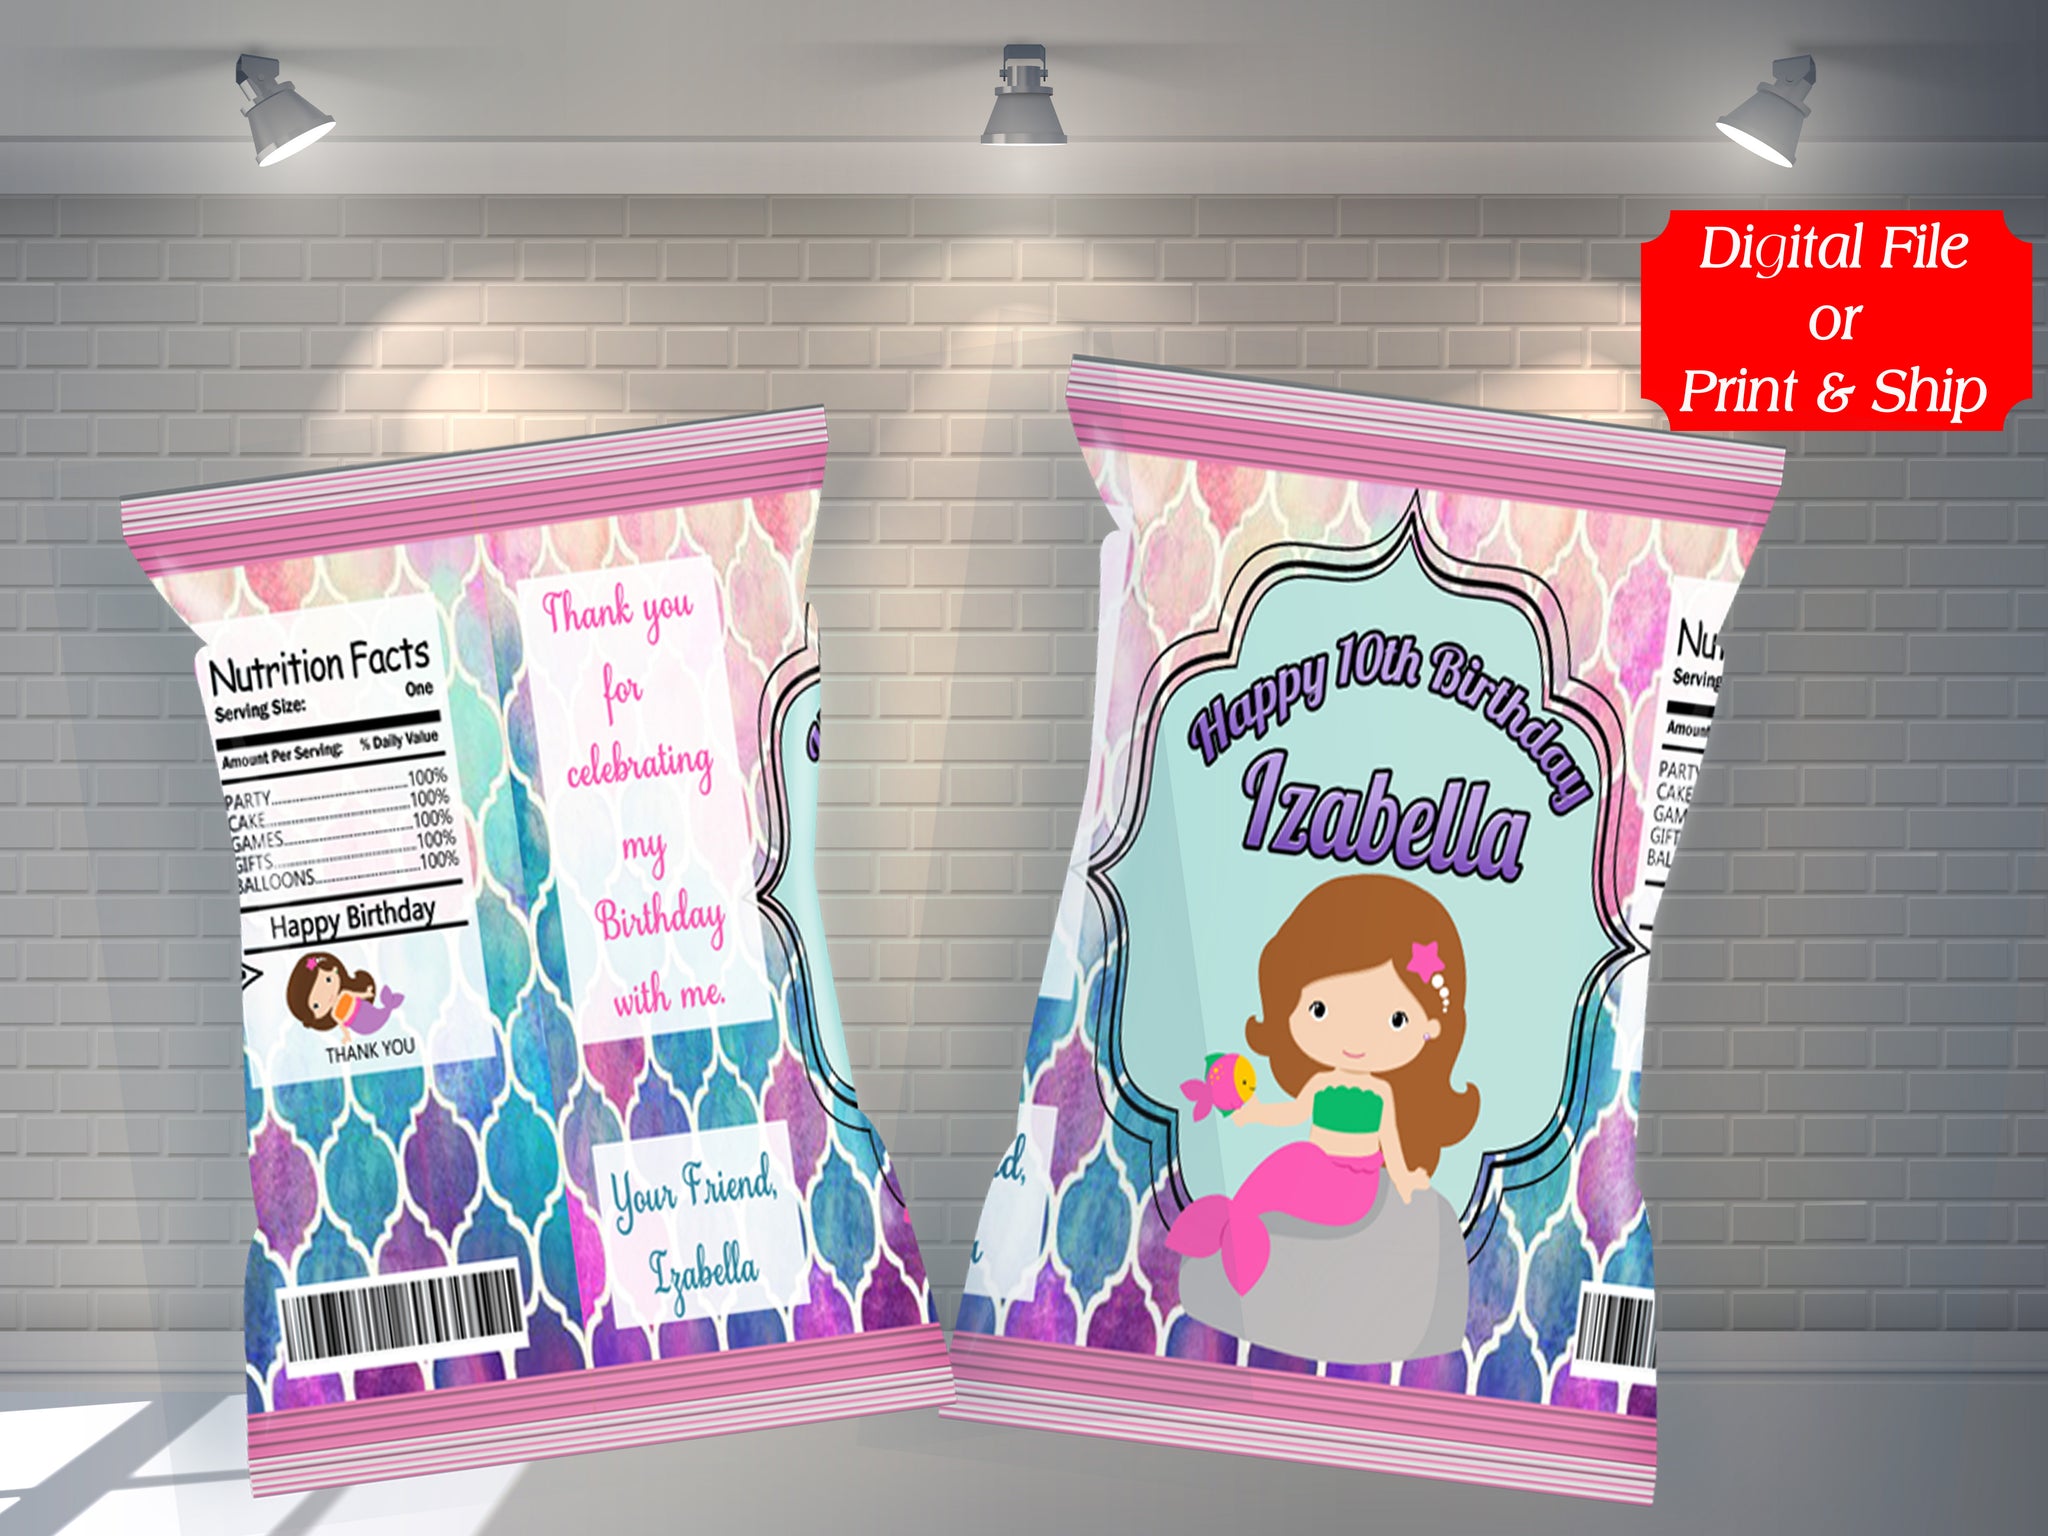 (12) Personalized MERMAID Chip Candy Treat Bags Party Favors Printed or D. File